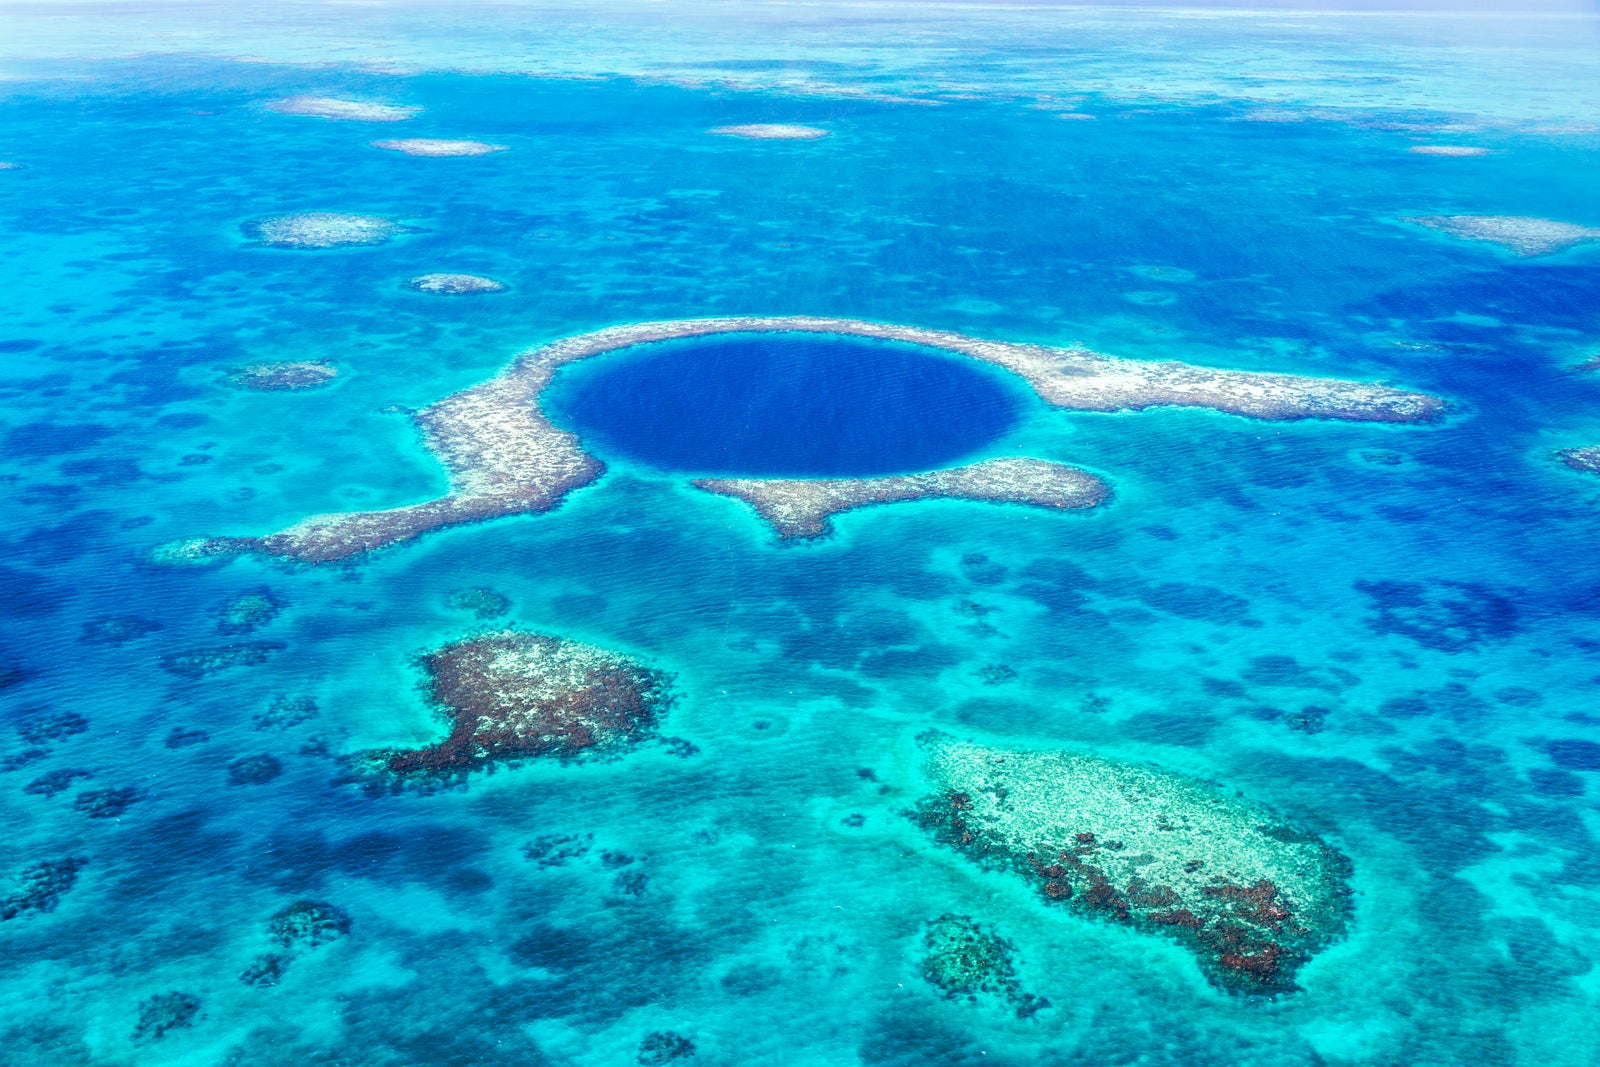 Aerial photo of the Blue Hole, Lighthouse reef, Belize.